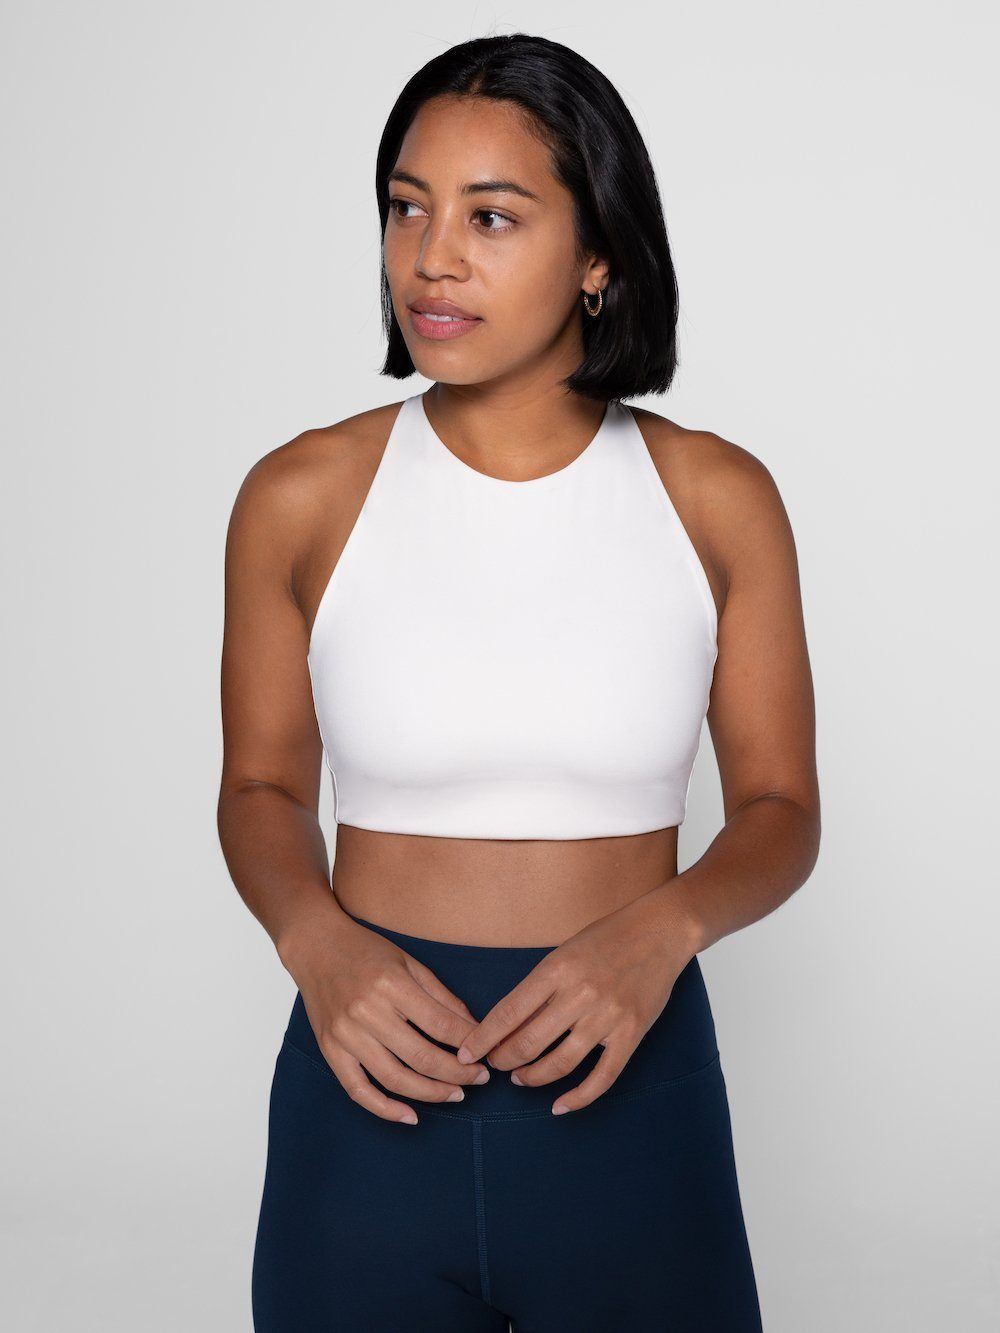 Girlfriend Collective - Topanga sports Bra - Made from recycled plastic bottles - Weekendbee - sustainable sportswear